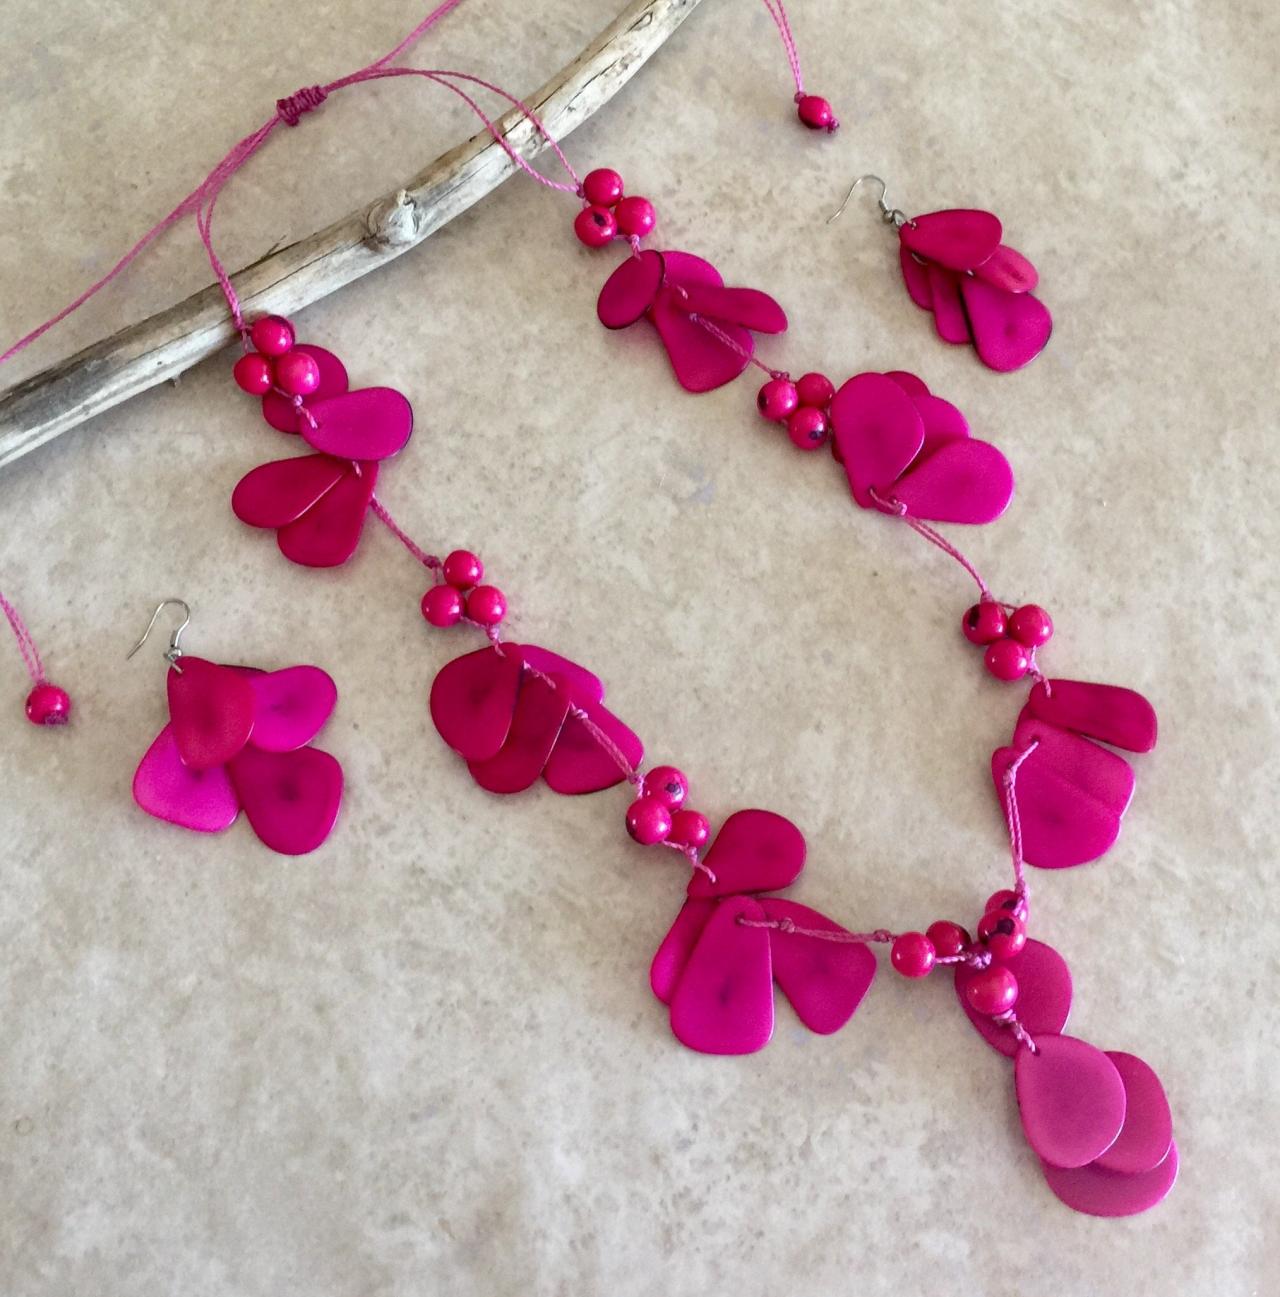 New! Fucsia Long Necklace and Earrings, Tagua Nut Necklace, Statement Necklace, Handmade Necklace, Seeds Beads Necklace, Ecofriendly Jewelry